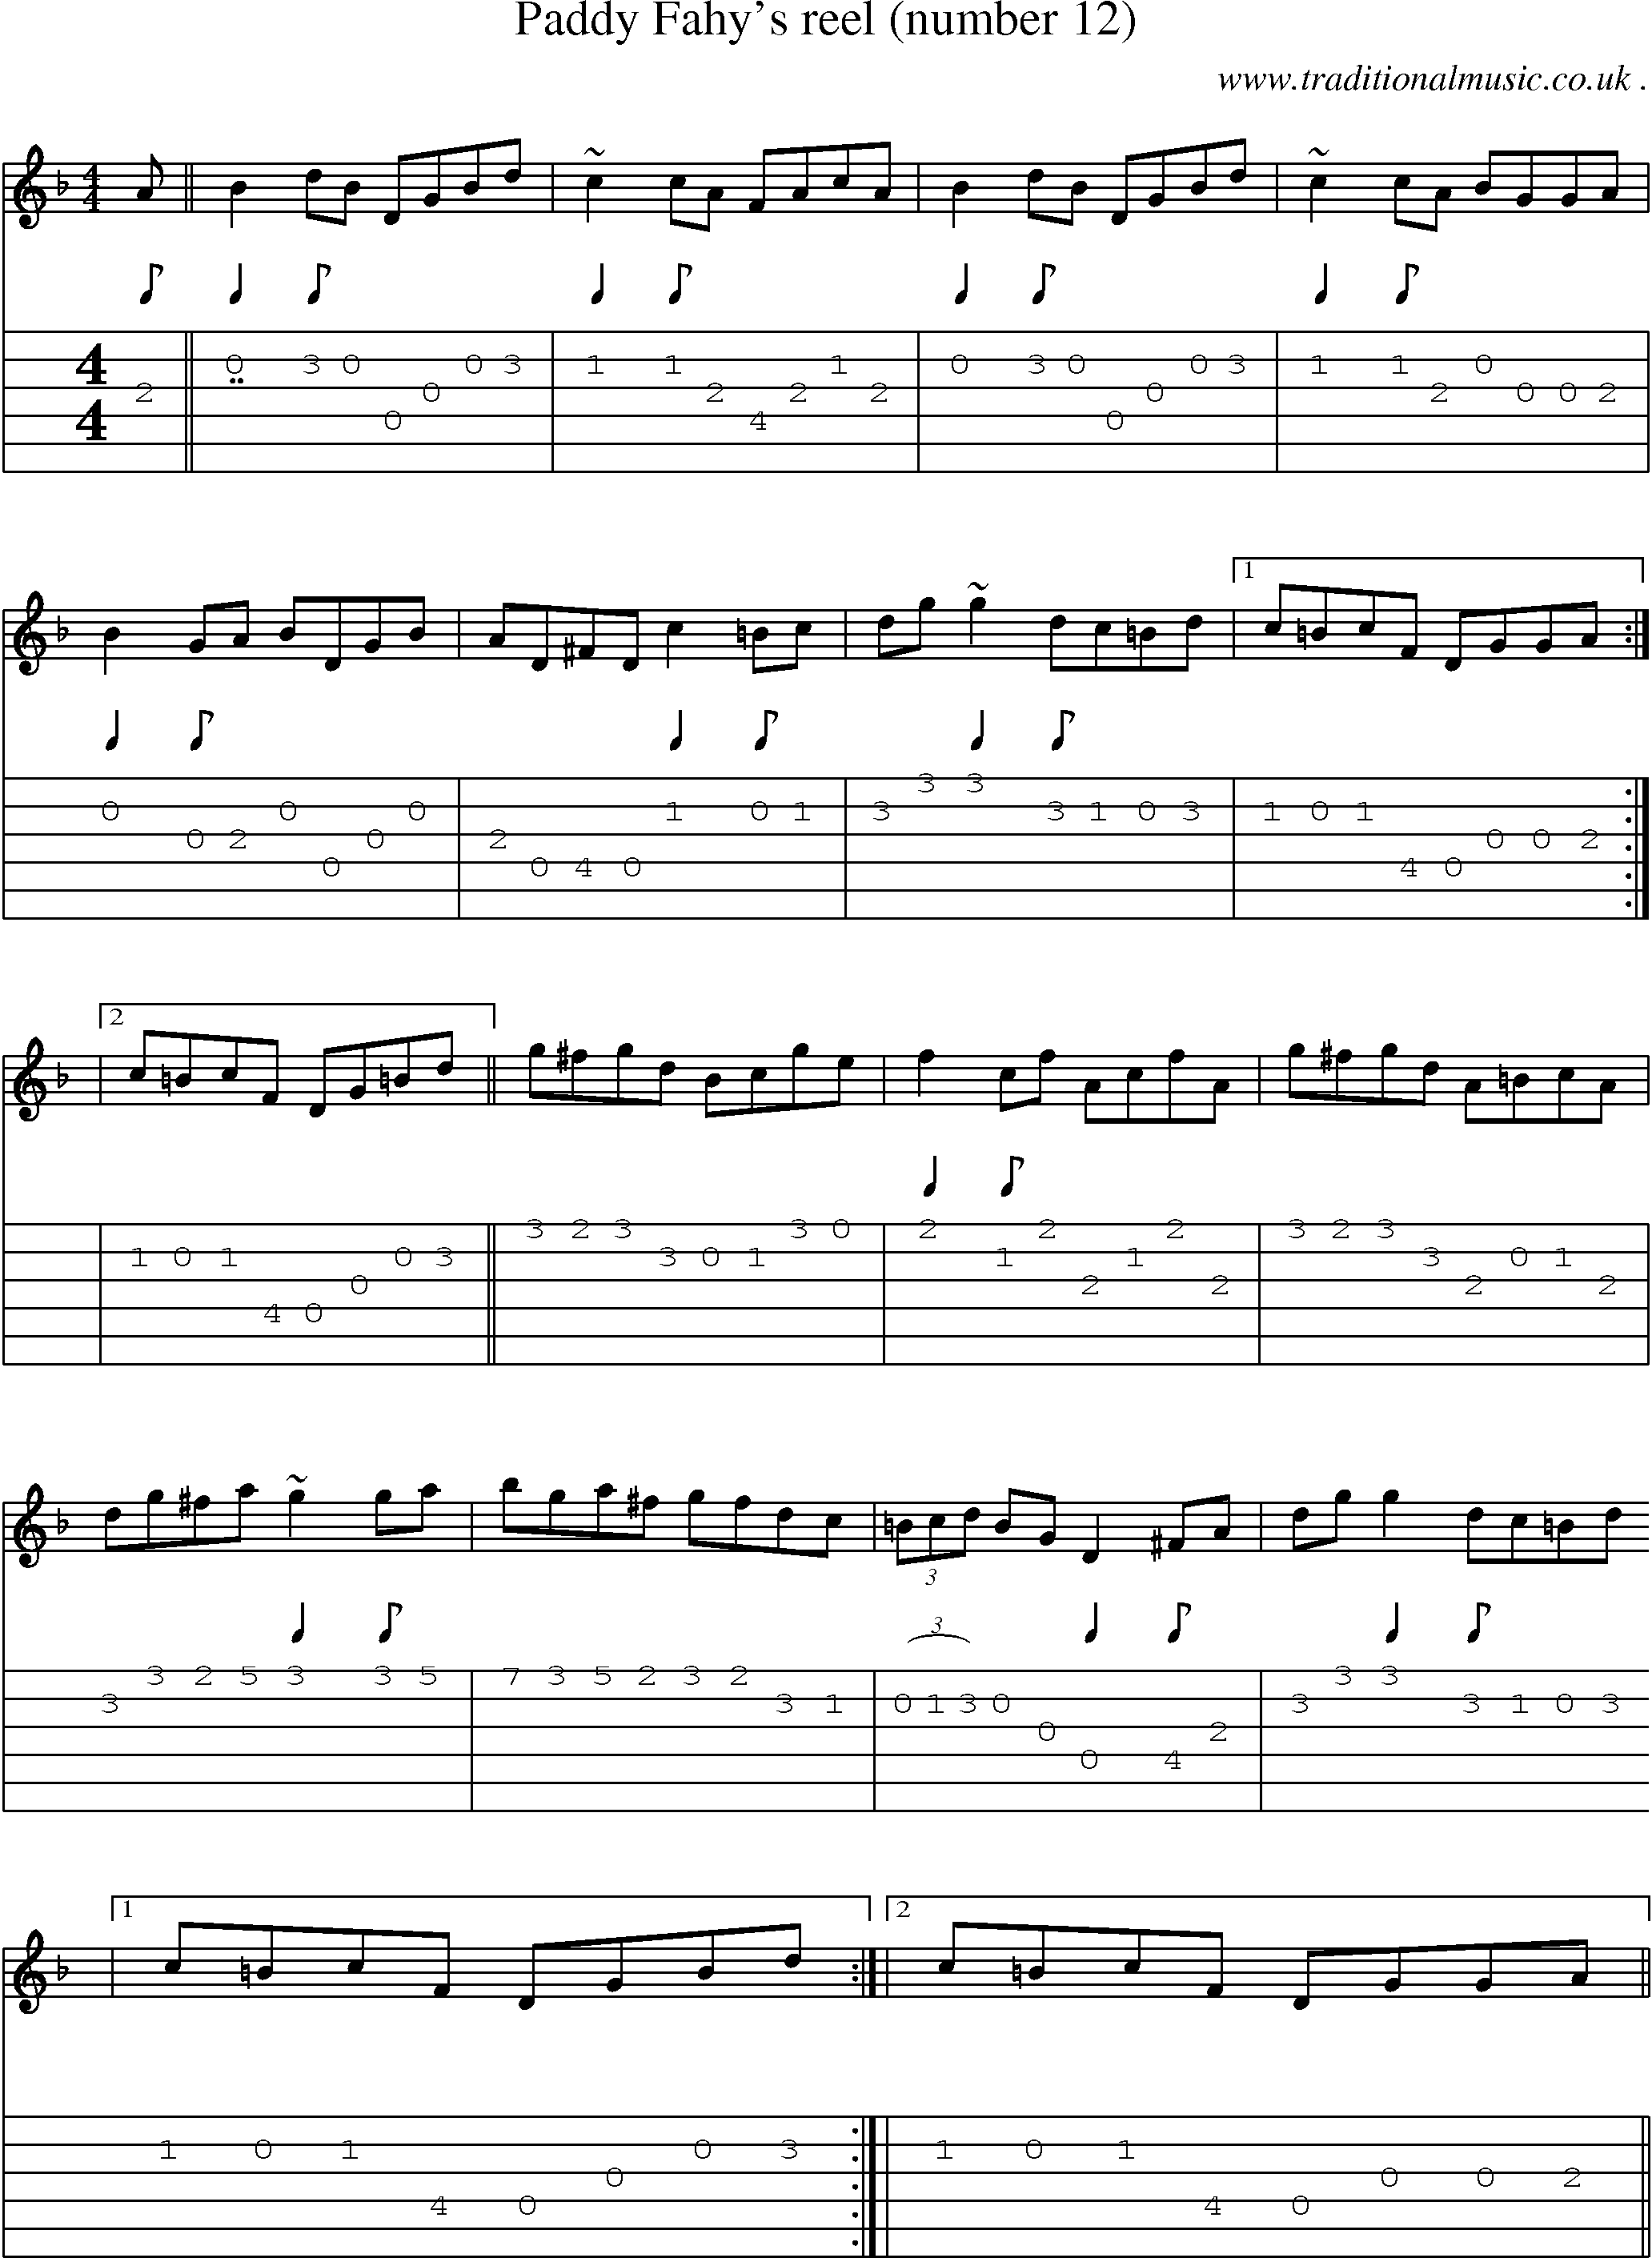 Sheet-music  score, Chords and Guitar Tabs for Paddy Fahys Reel Number 12